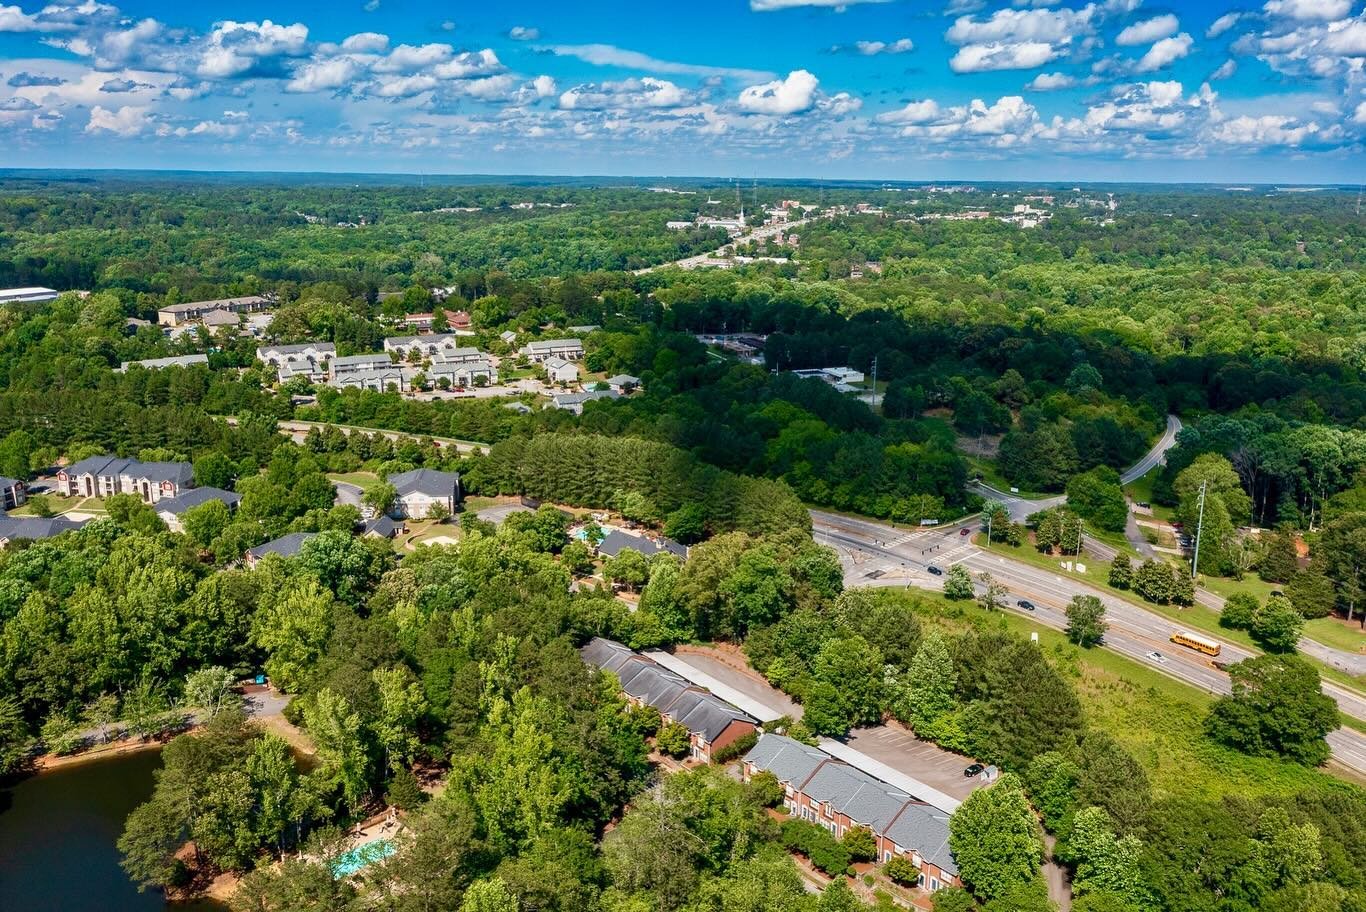 Drone photos of a real estate listing in Athens GA. #athensga #athensgarealestate #athensgaphotographer